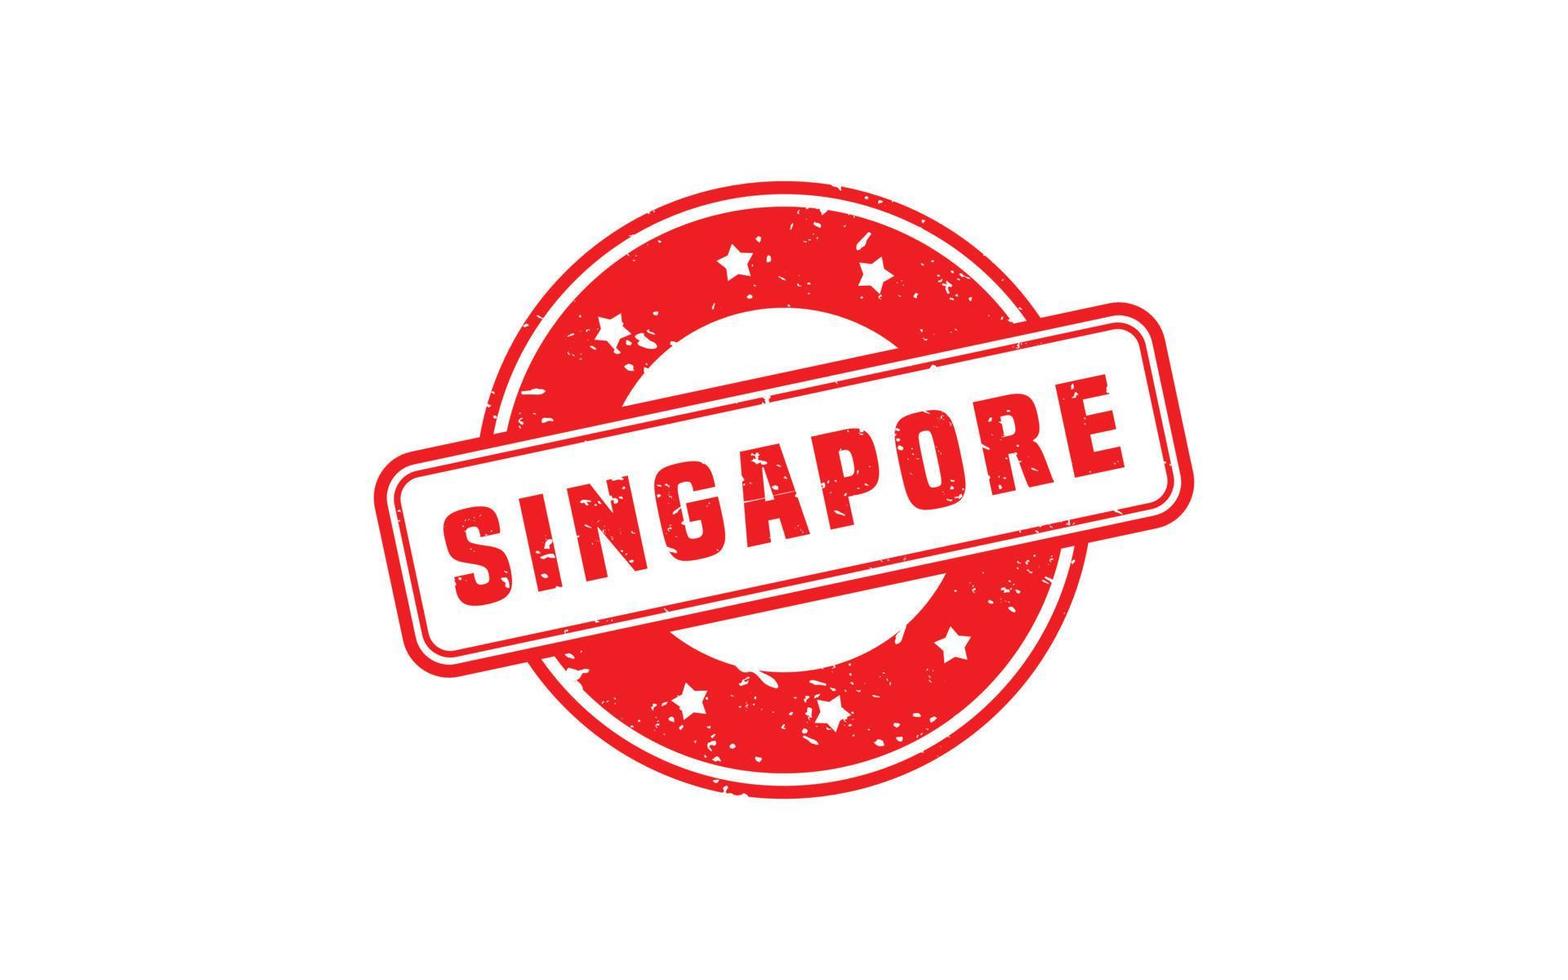 SINGAPORE stamp rubber with grunge style on white background vector